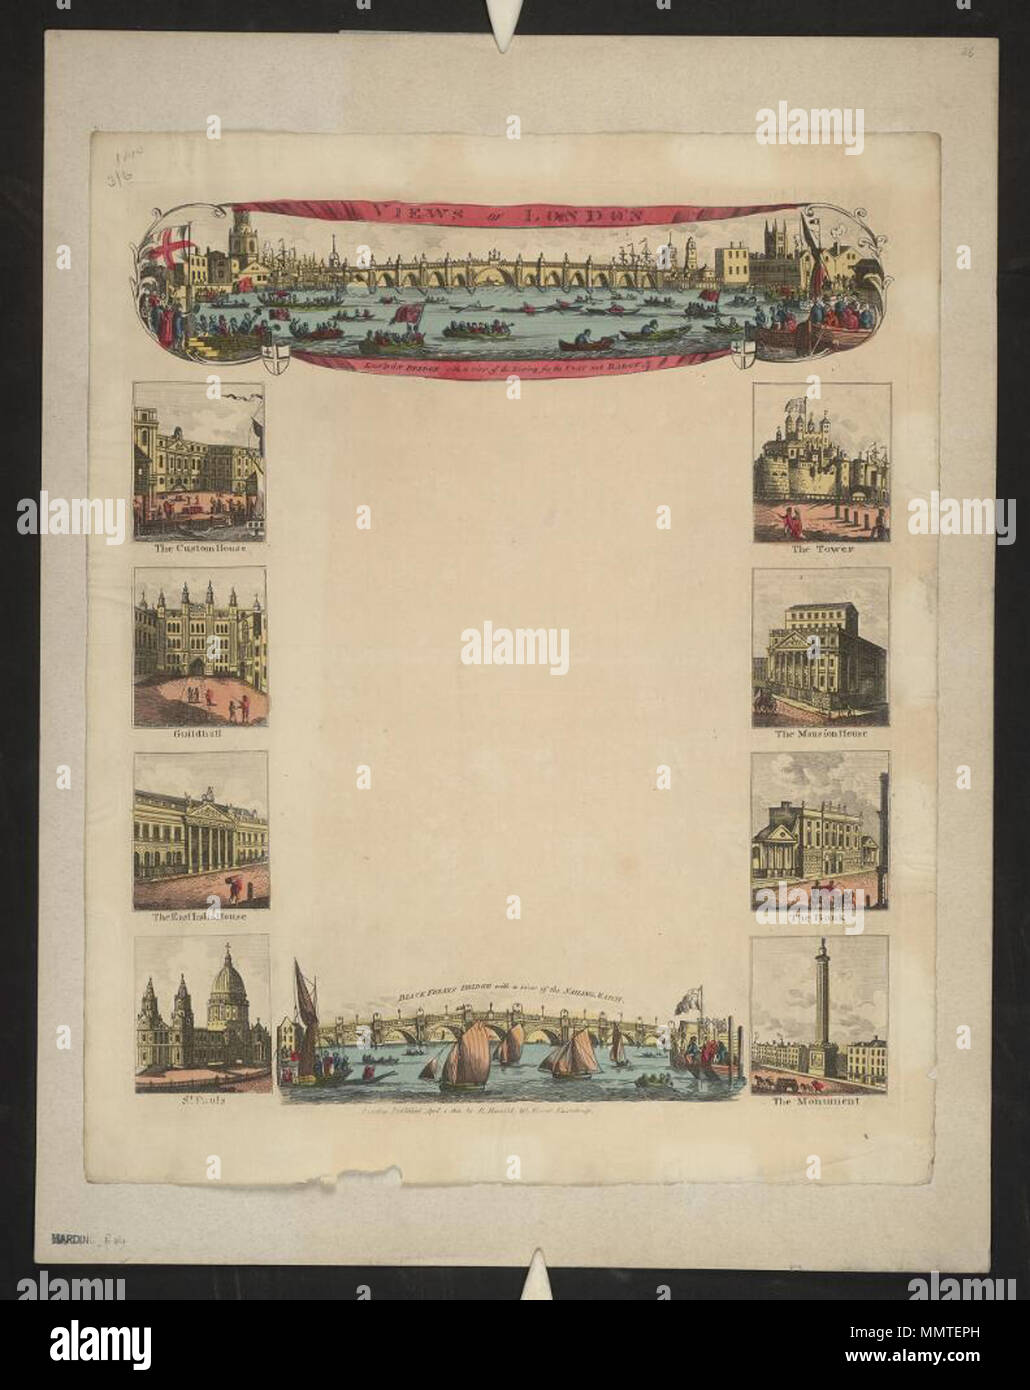 . Writing blank of 1814 entitled Views of London; London Bridge with a view of the rowing for the Coat and Badge; Custom House; Tower; Guildhall; Mansion House; East India House; Bank; St. Pauls; Monument; Black Friars Bridge with a view of the sailing match; Harding B 44(36)  Views of London. 4 April 1814. Harrild, Robert, 1780-1853 [author] Bodleian Libraries, Views of London Stock Photo